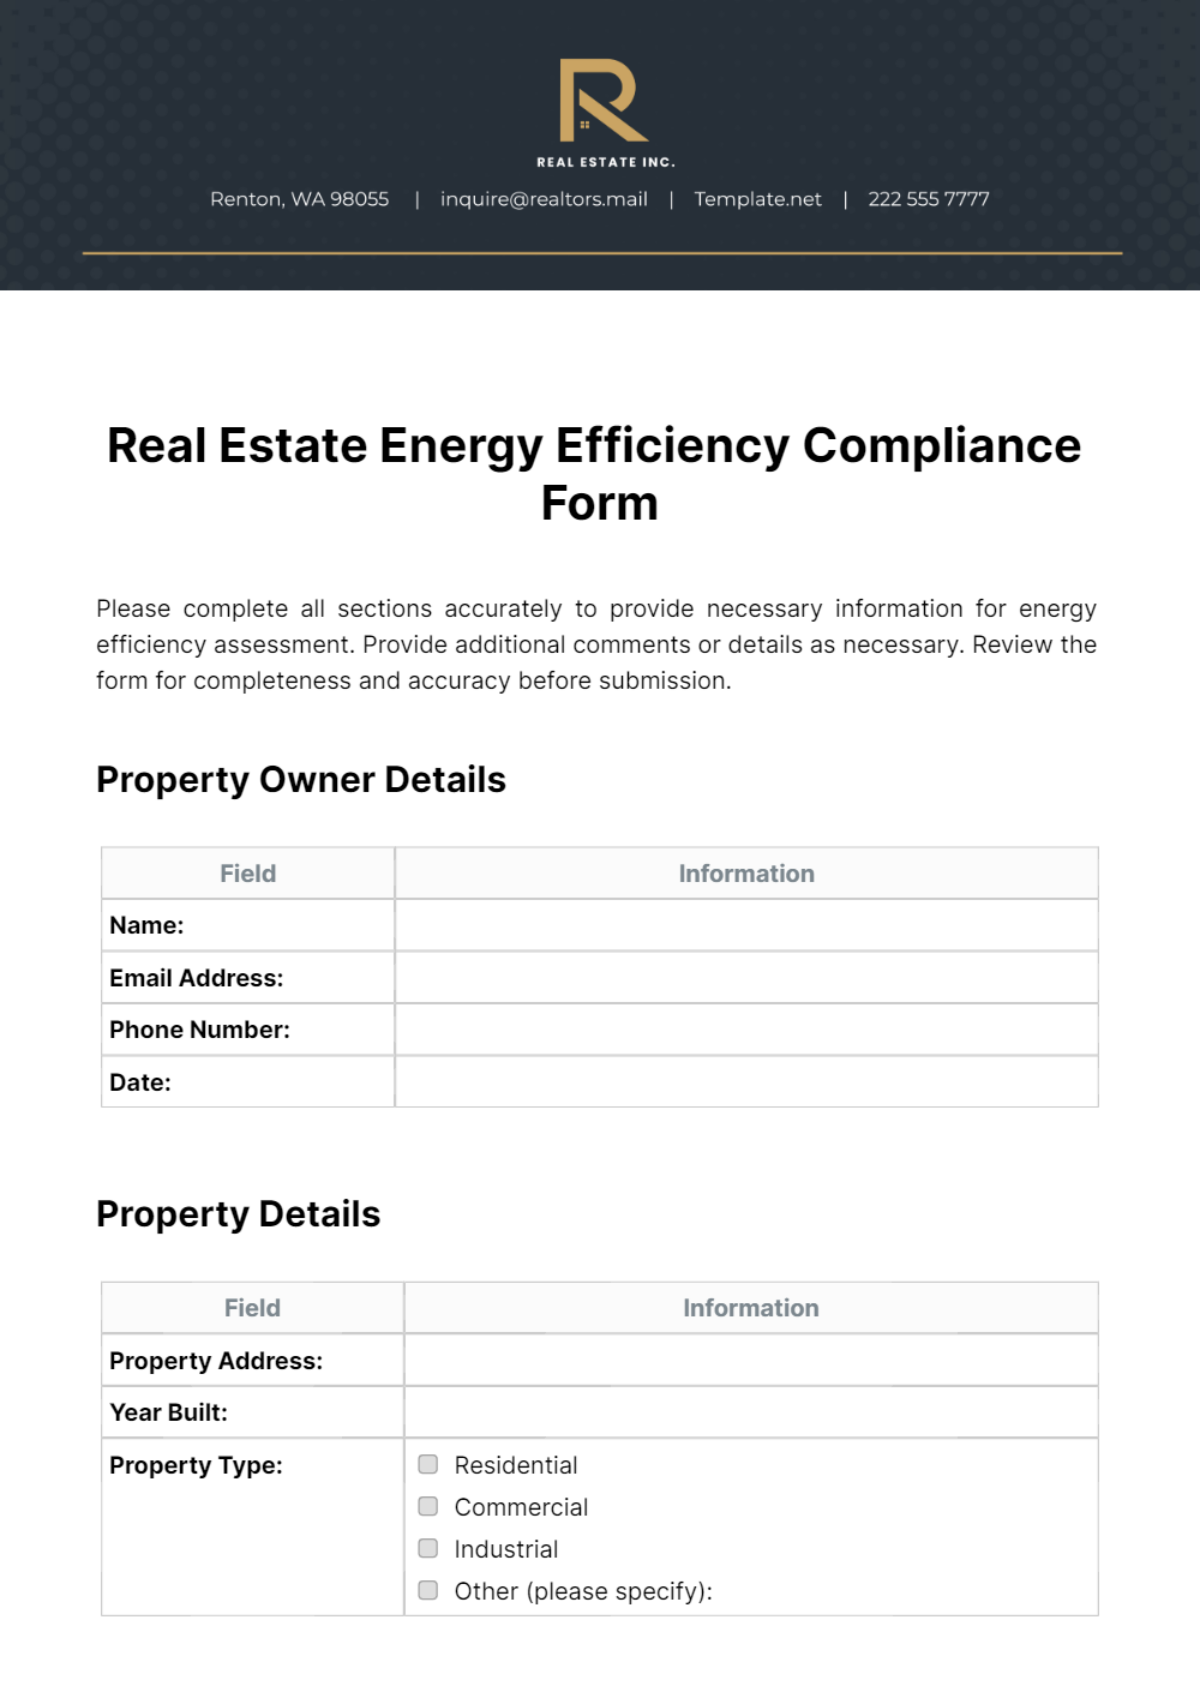 Real Estate Energy Efficiency Compliance Form Template